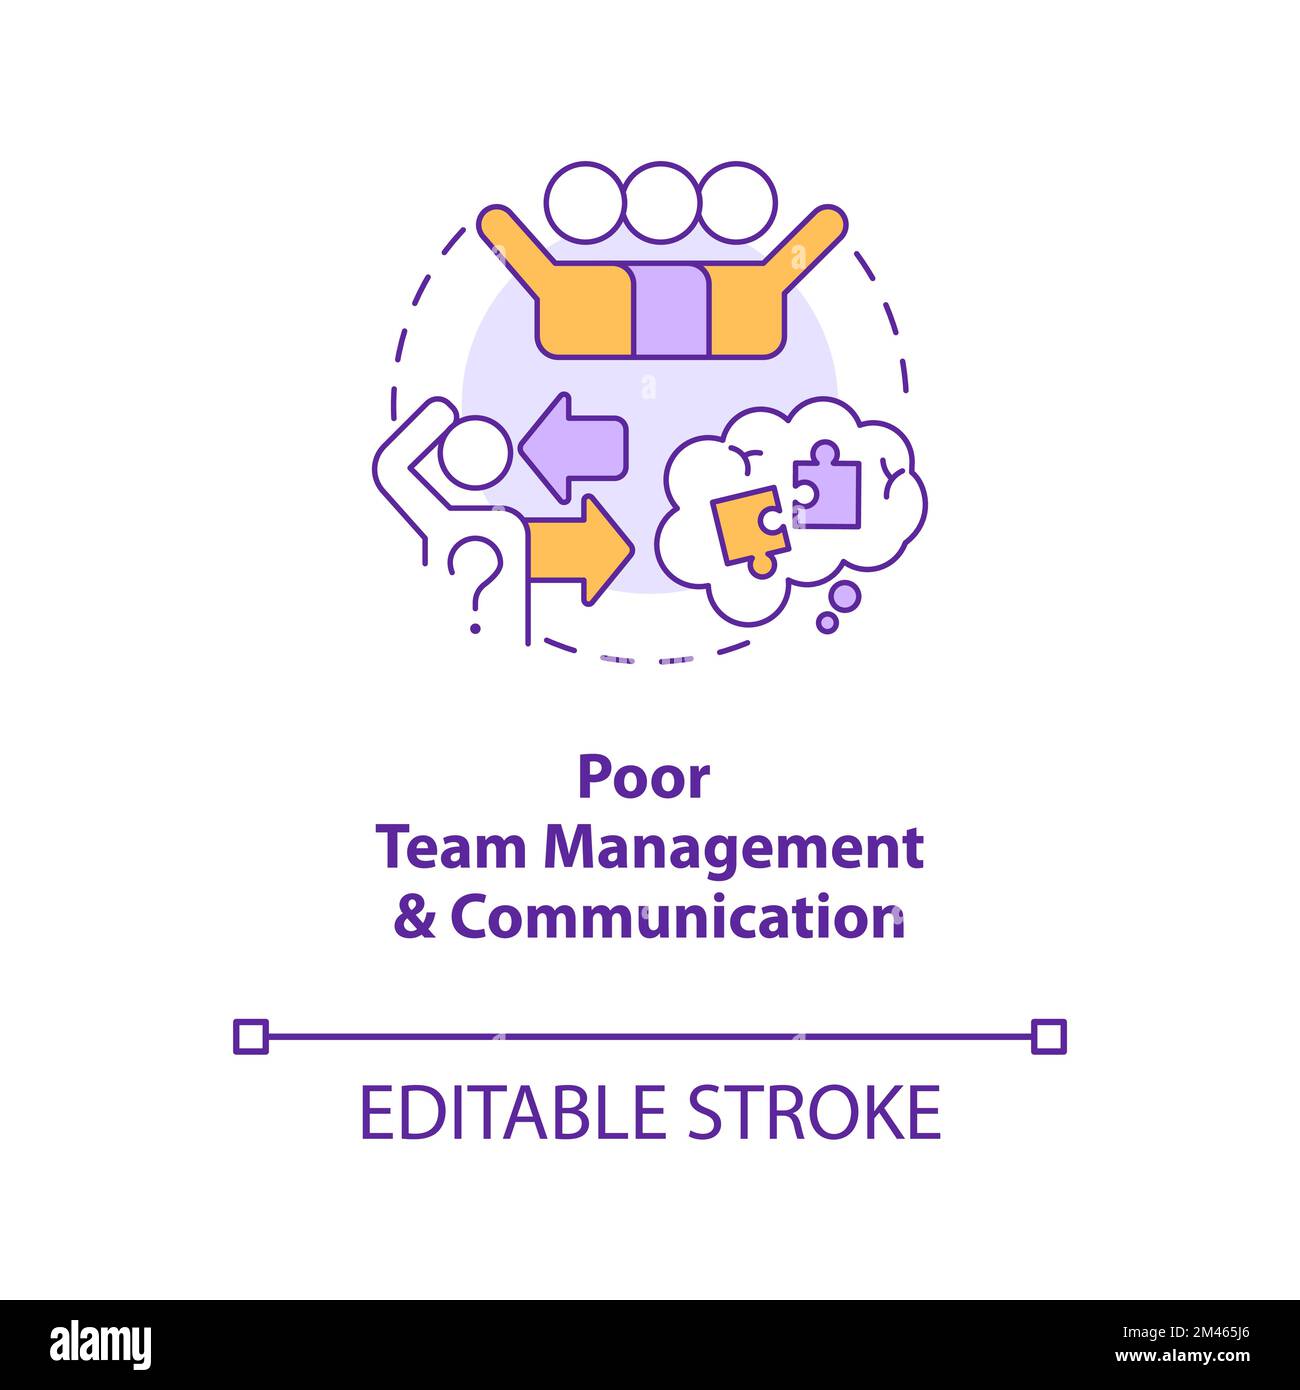 Poor team management and communication concept icon Stock Vector